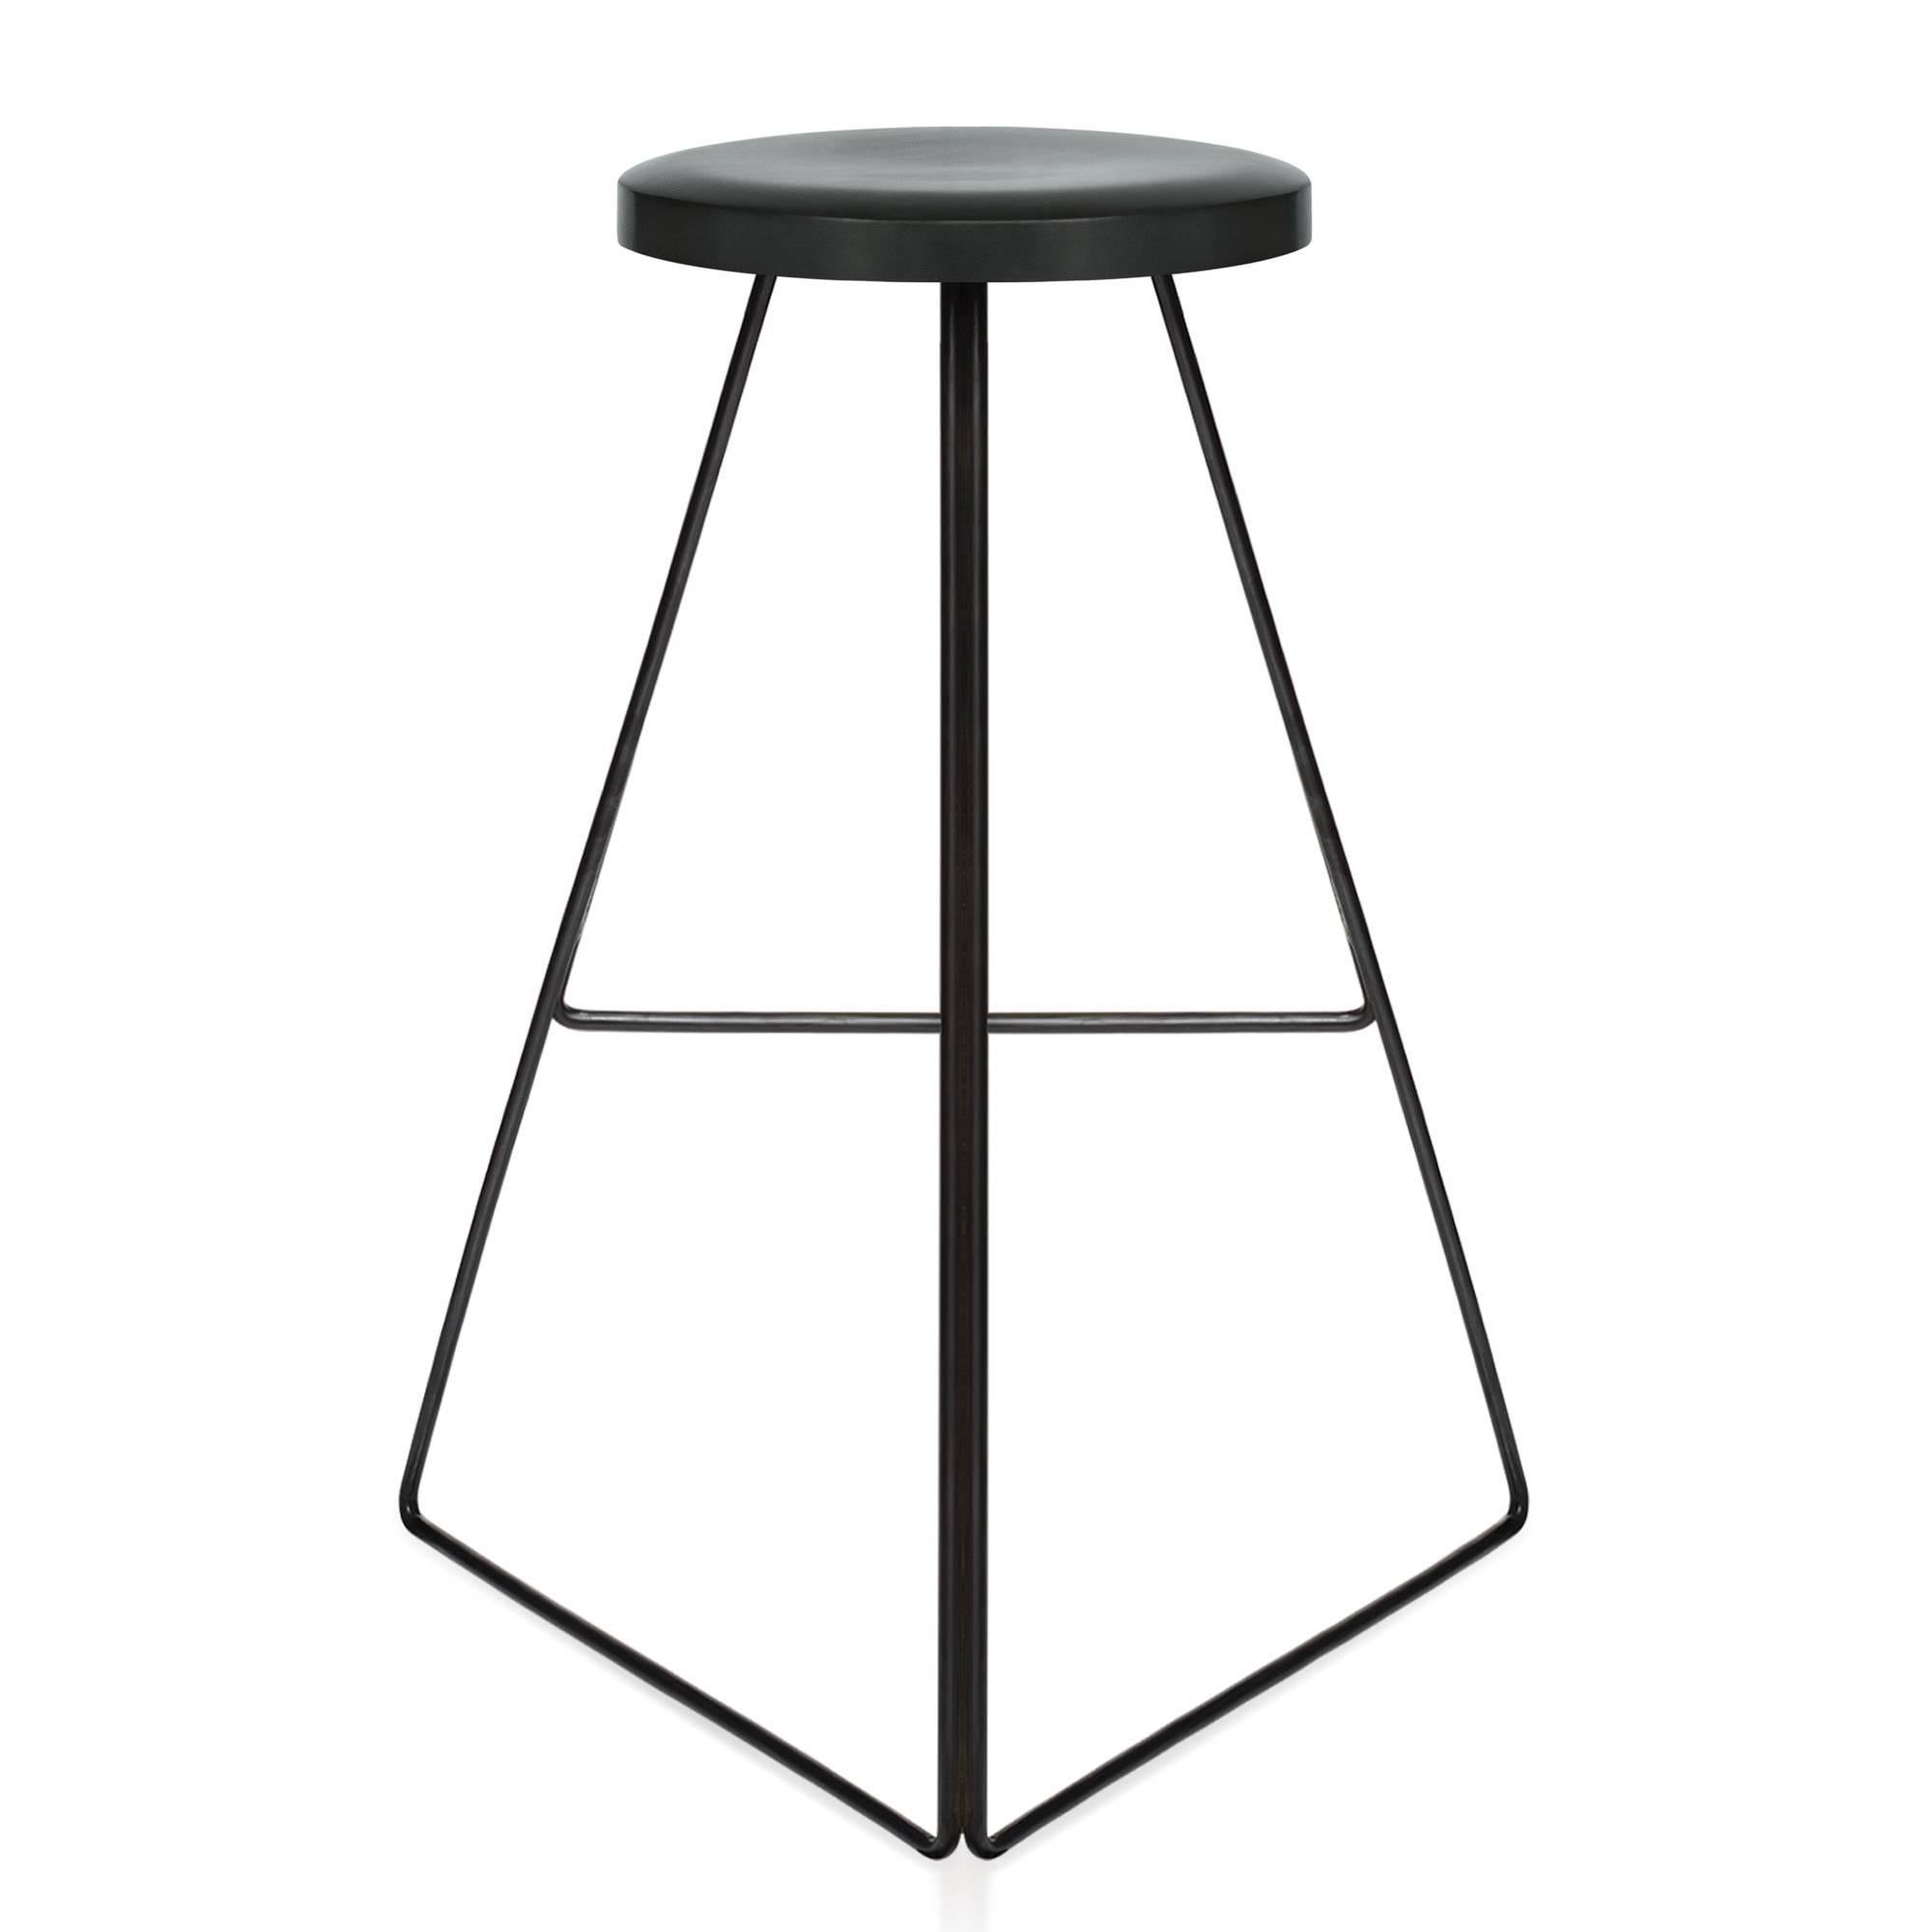 North American Coleman Stool, Black and Charcoal, 54 Variations For Sale